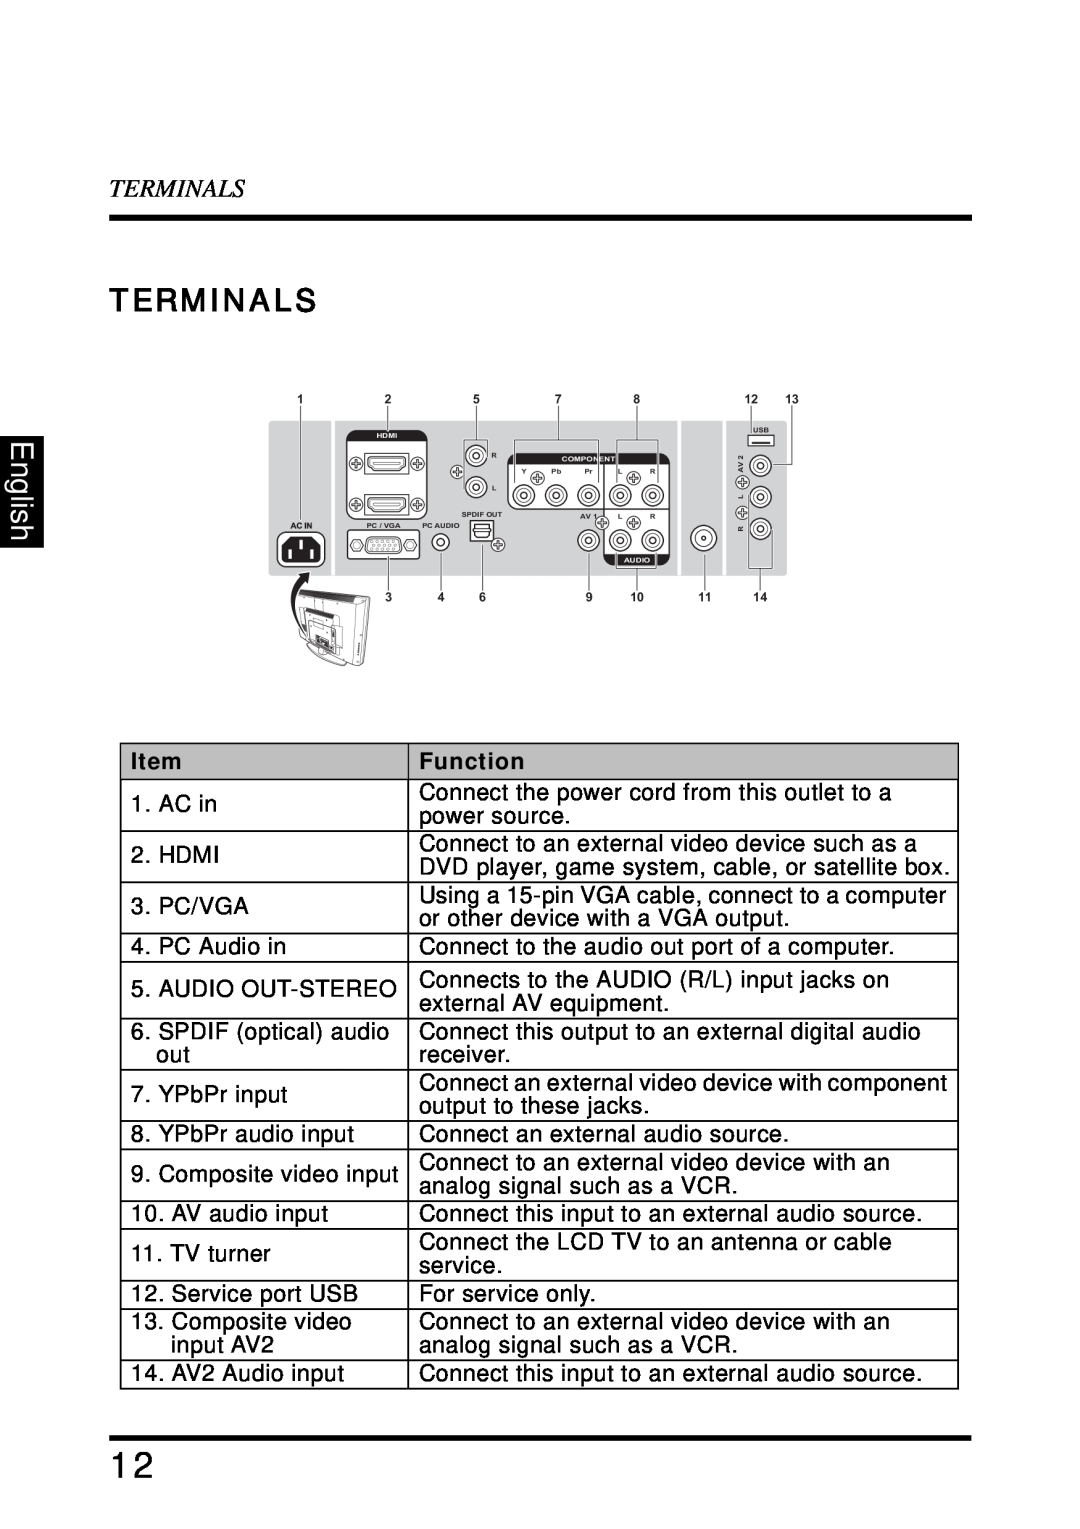 Westinghouse SK-32H640G user manual Terminals, English, Function 